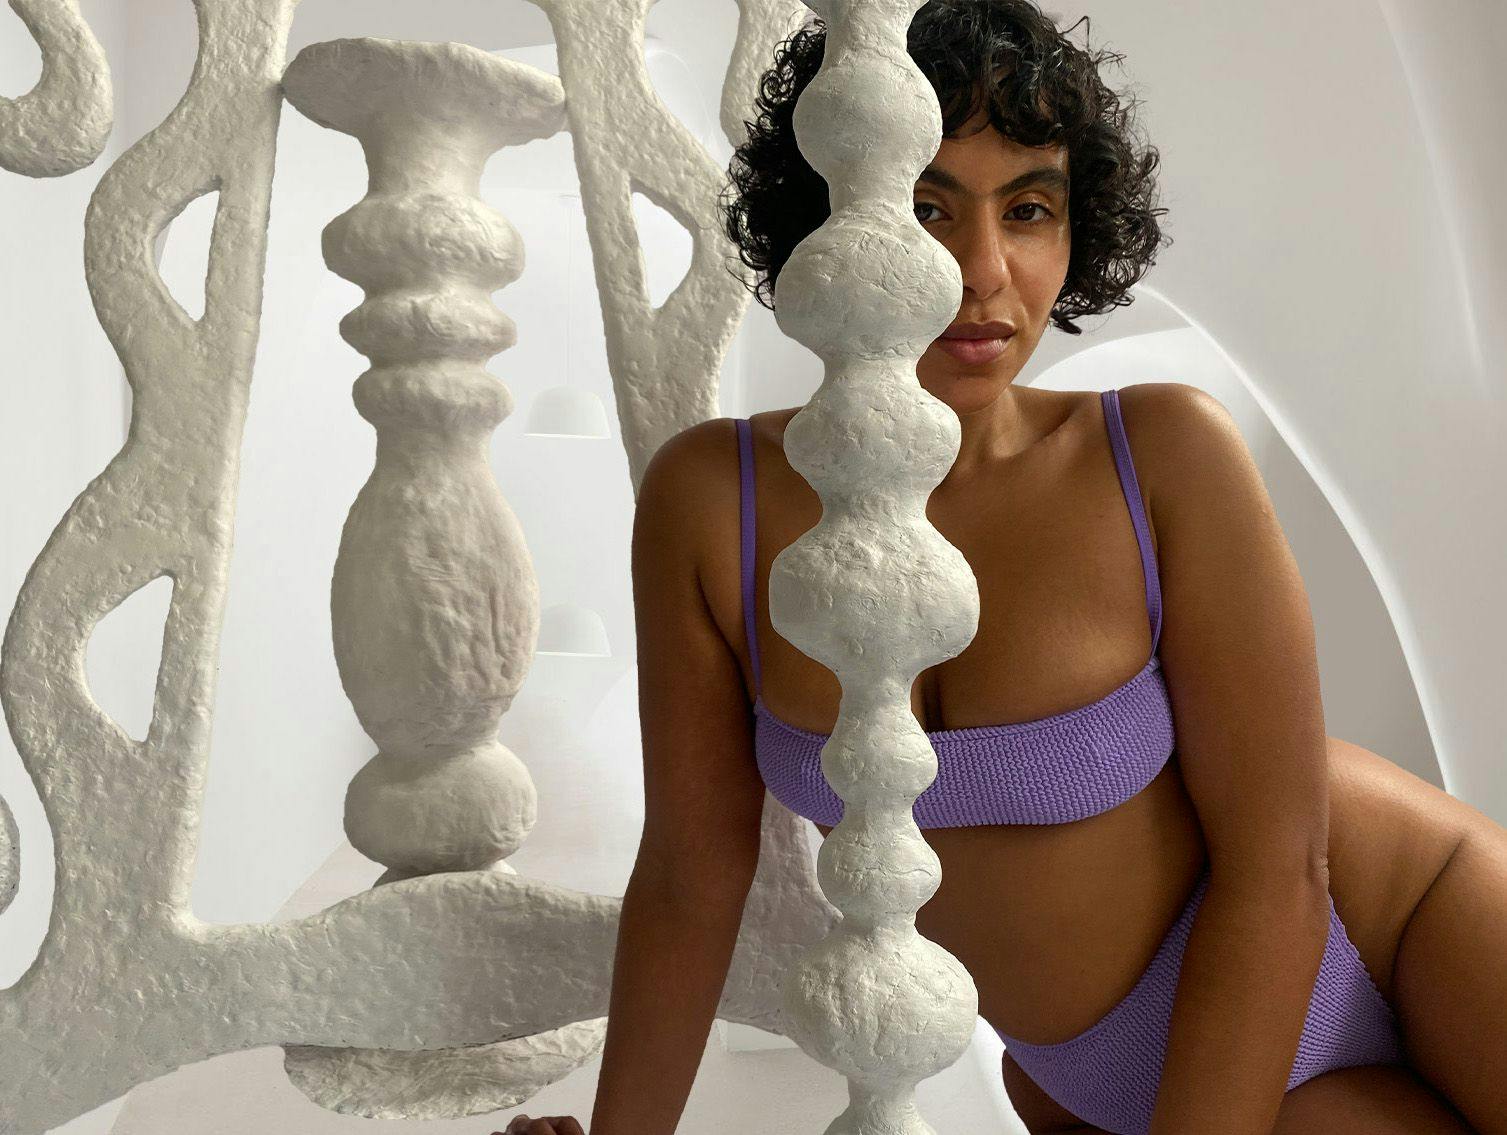 Nadine sitting with one of her sculptures, wearing a lilac bikini